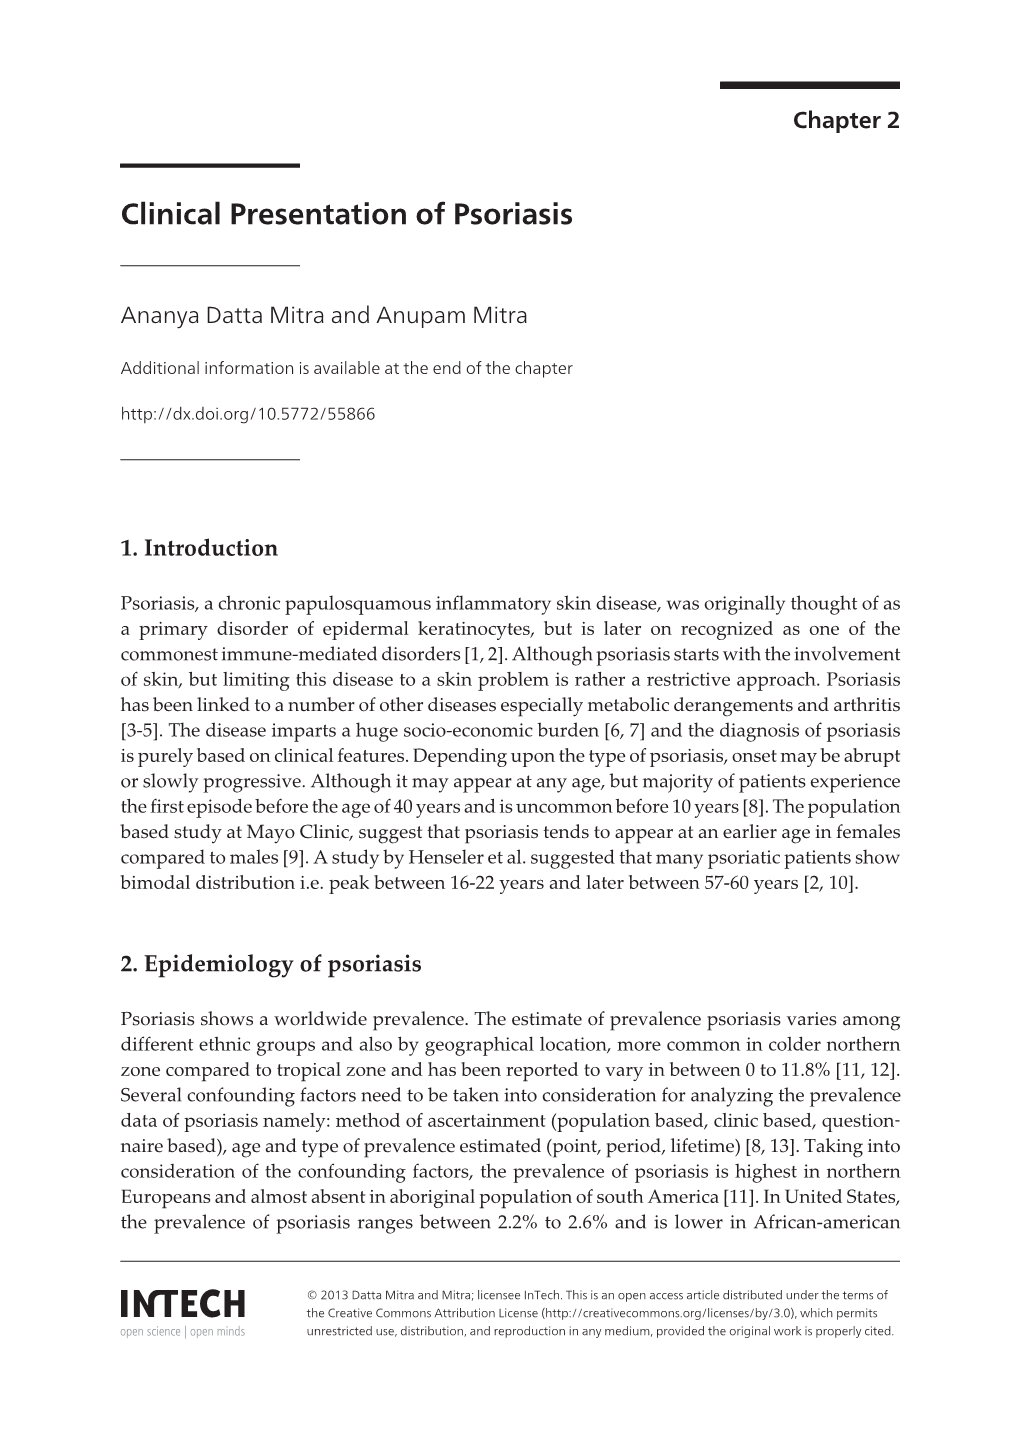 Clinical Presentation of Psoriasis